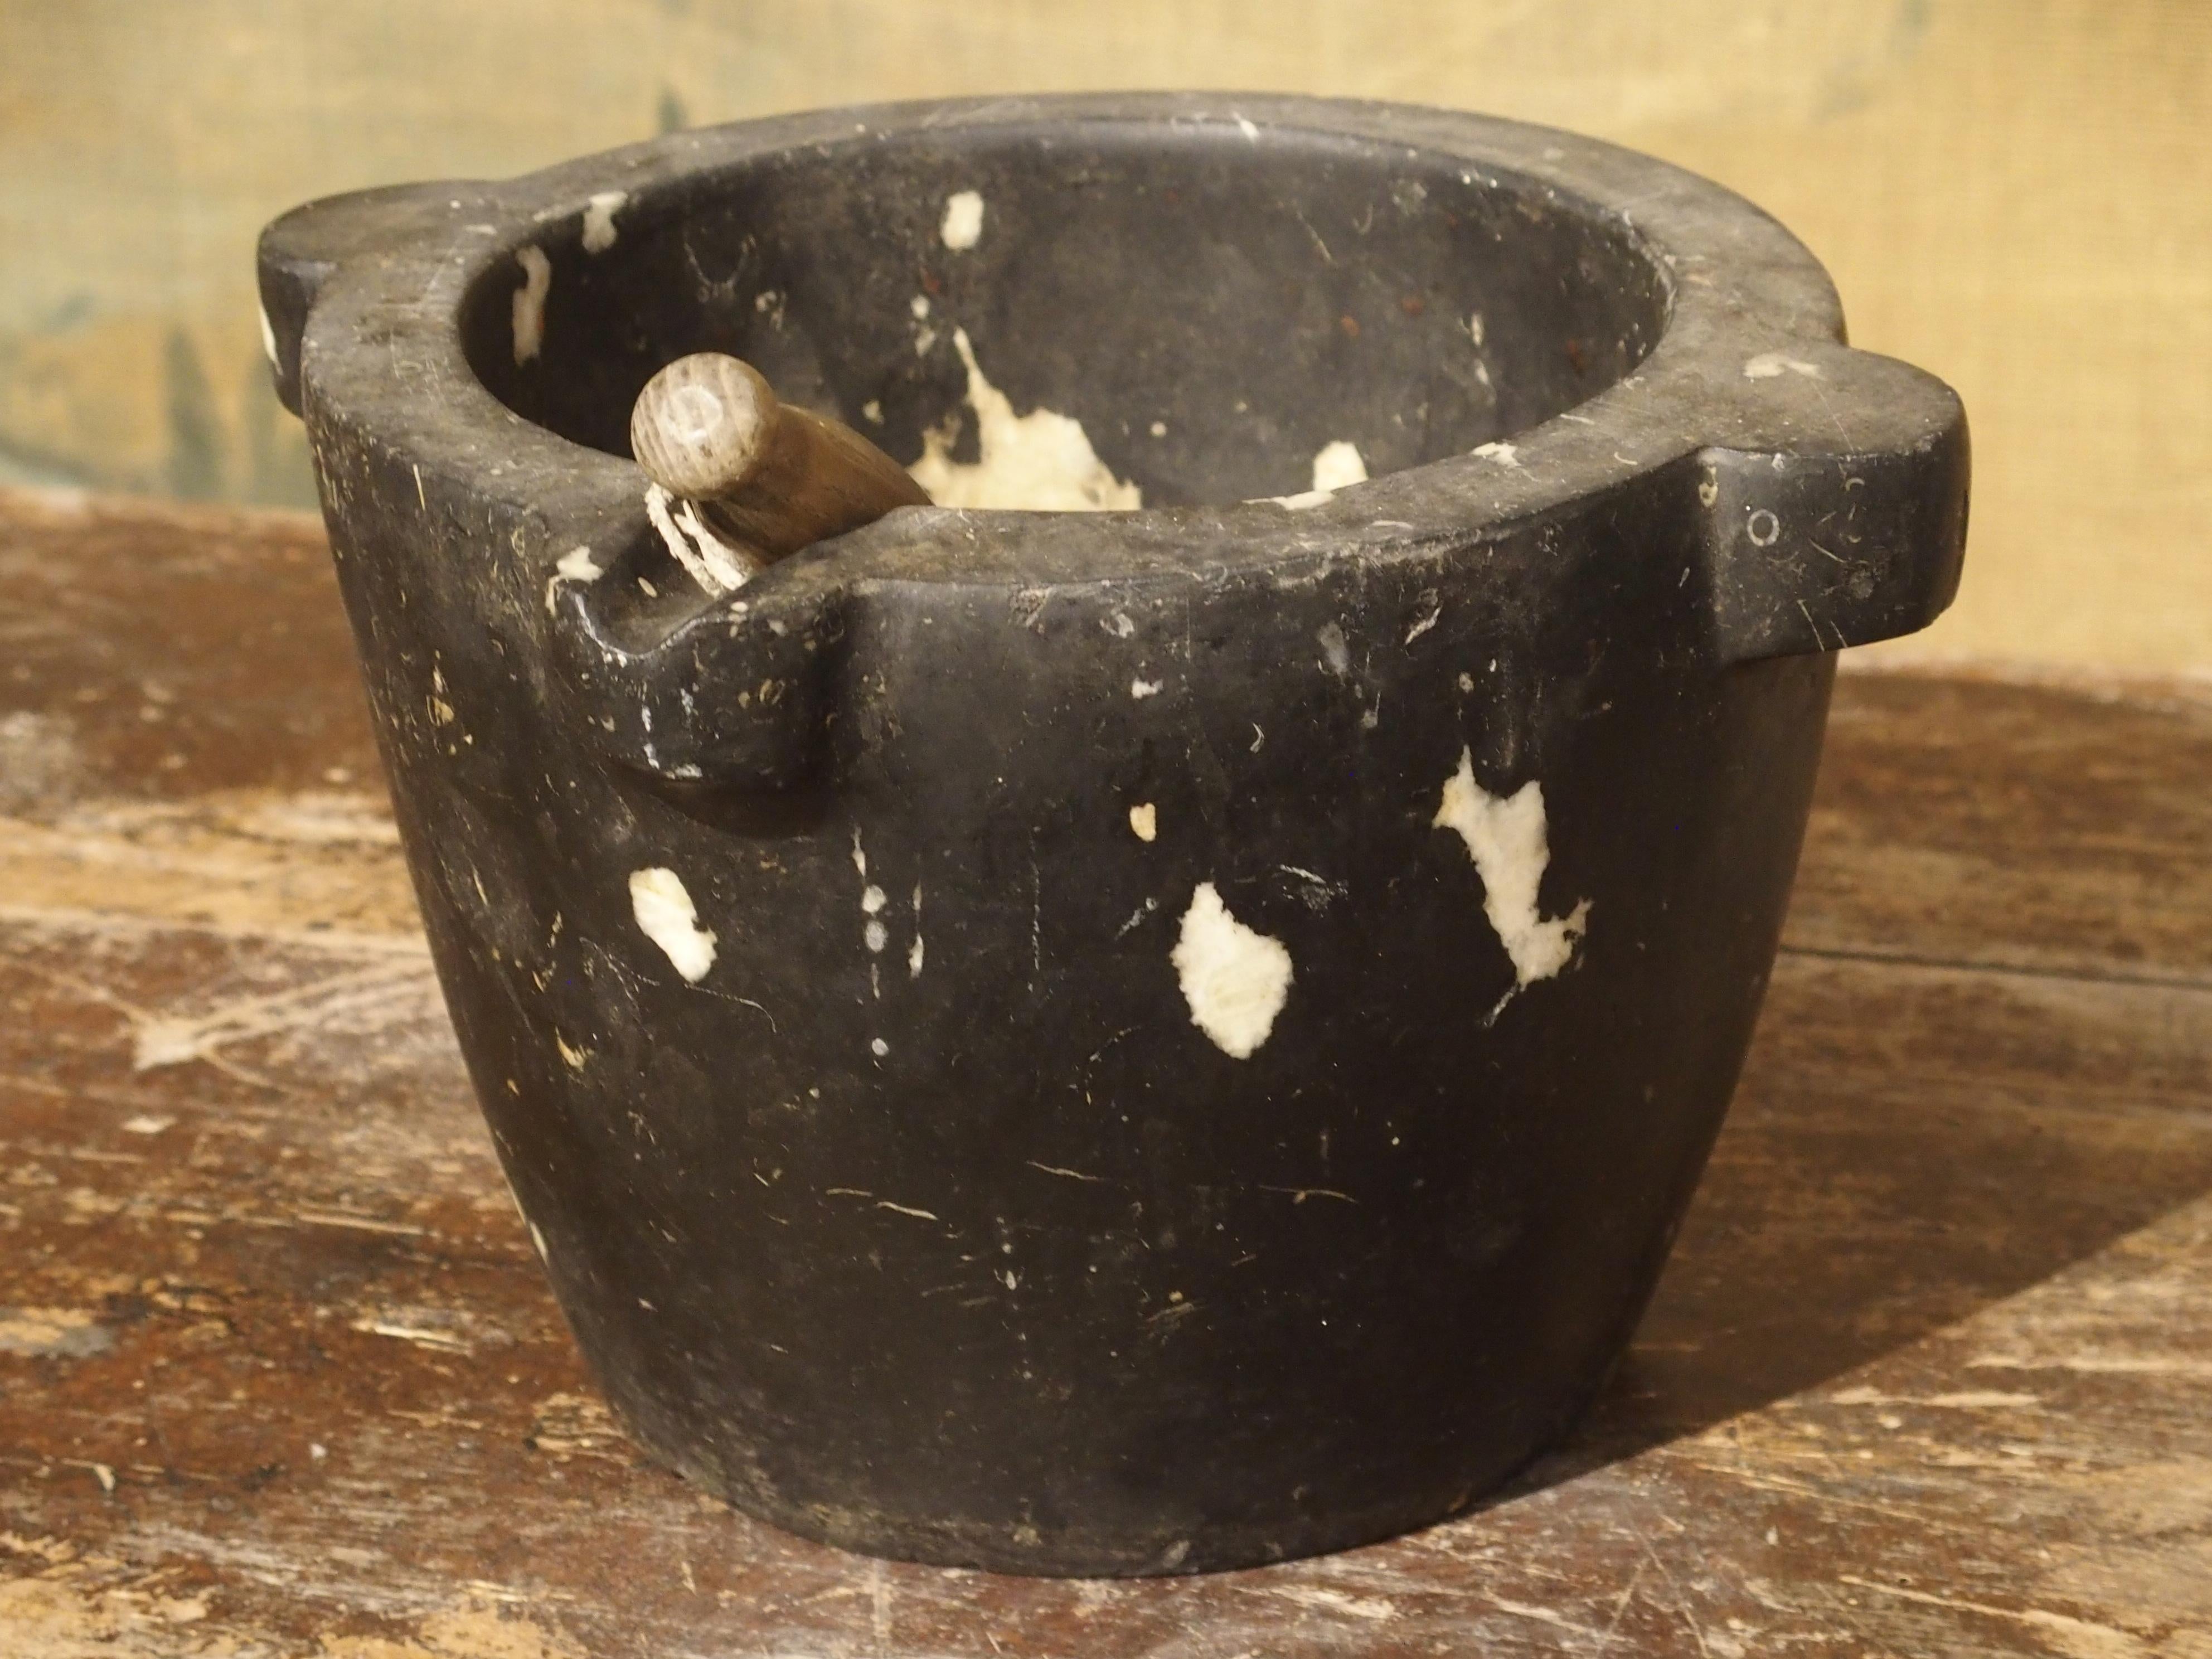 We have a wide range of assorted stone mortars and wooden pestles (one pestle is marble), from the collection of a former pharmacist in Rouen, France.

The original use of a mortar and pestle was to aid pharmacists in crushing herbs into powder